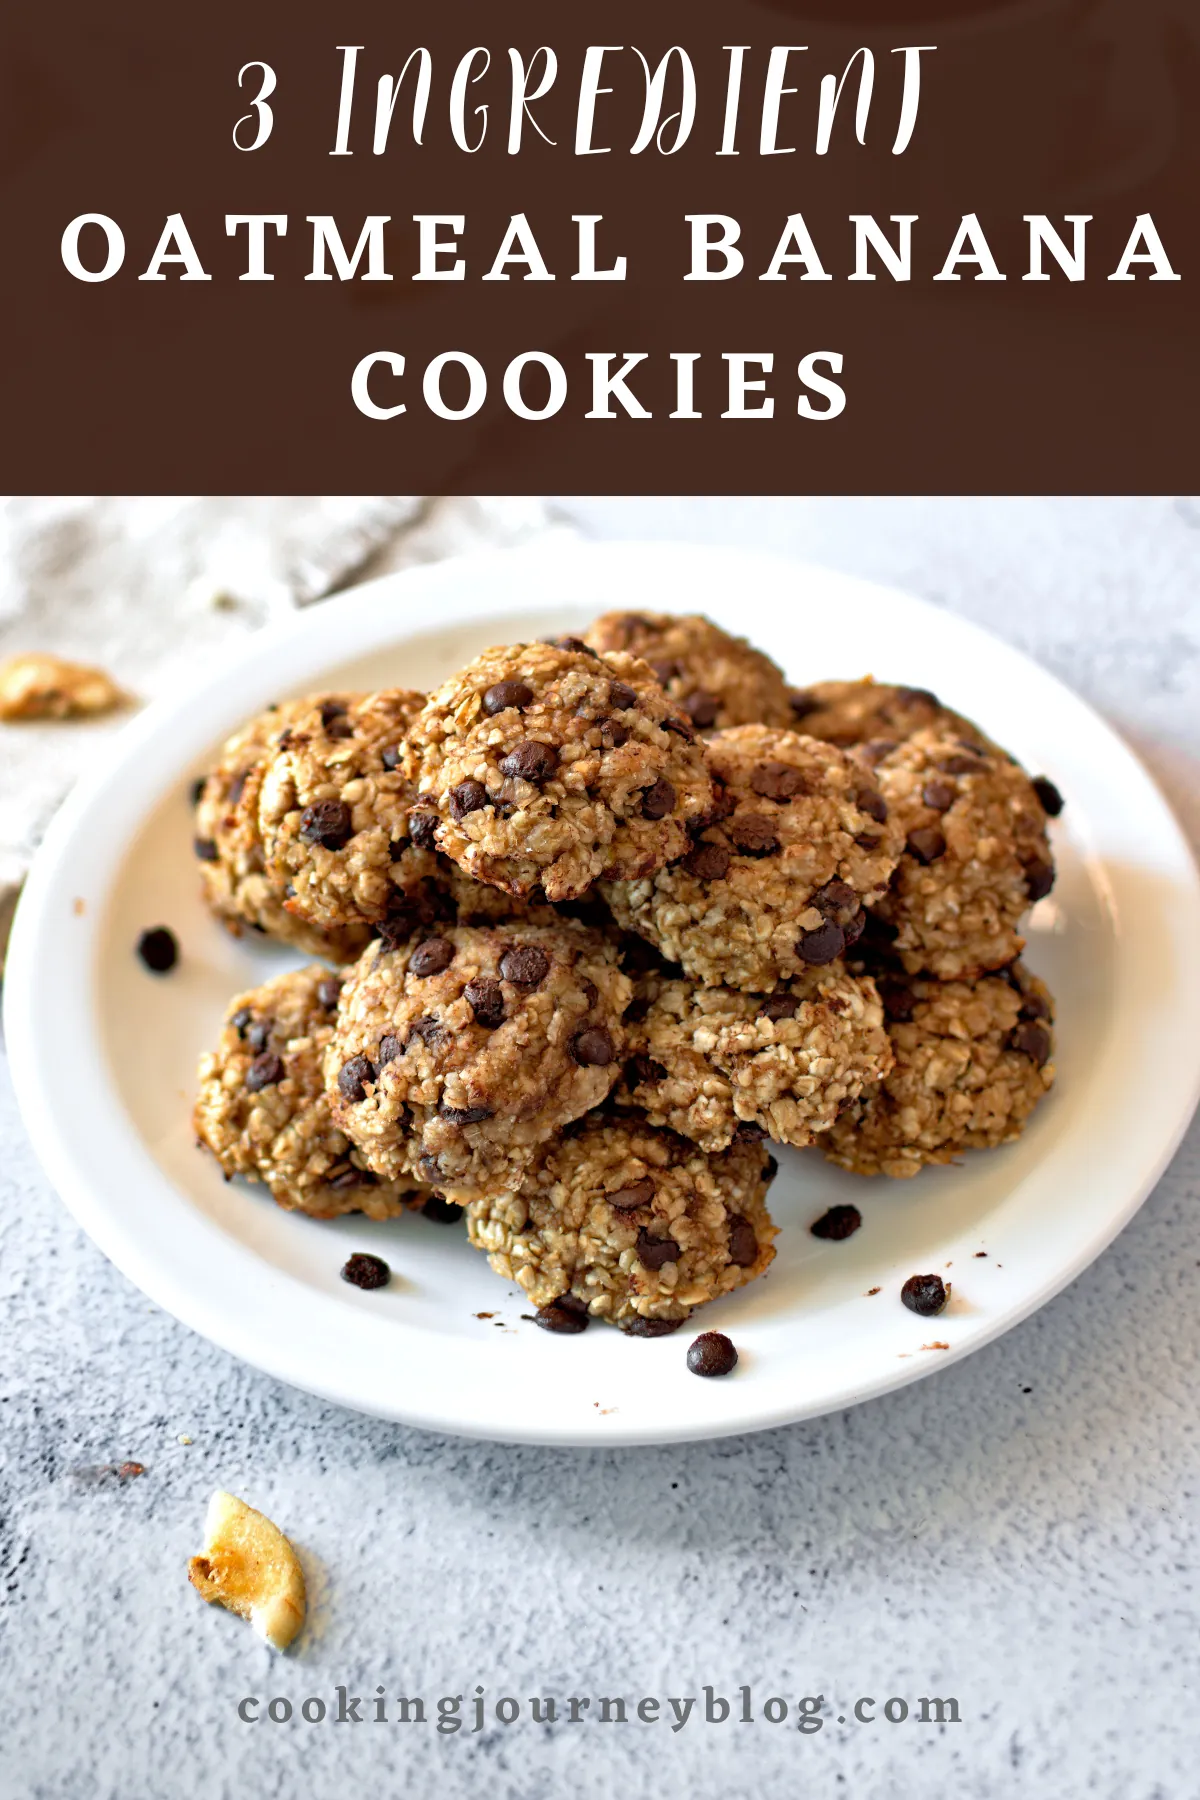 3 Ingredient Oatmeal Banana Cookies are great for breakfast or lunch. They are good to pack for toddlers.